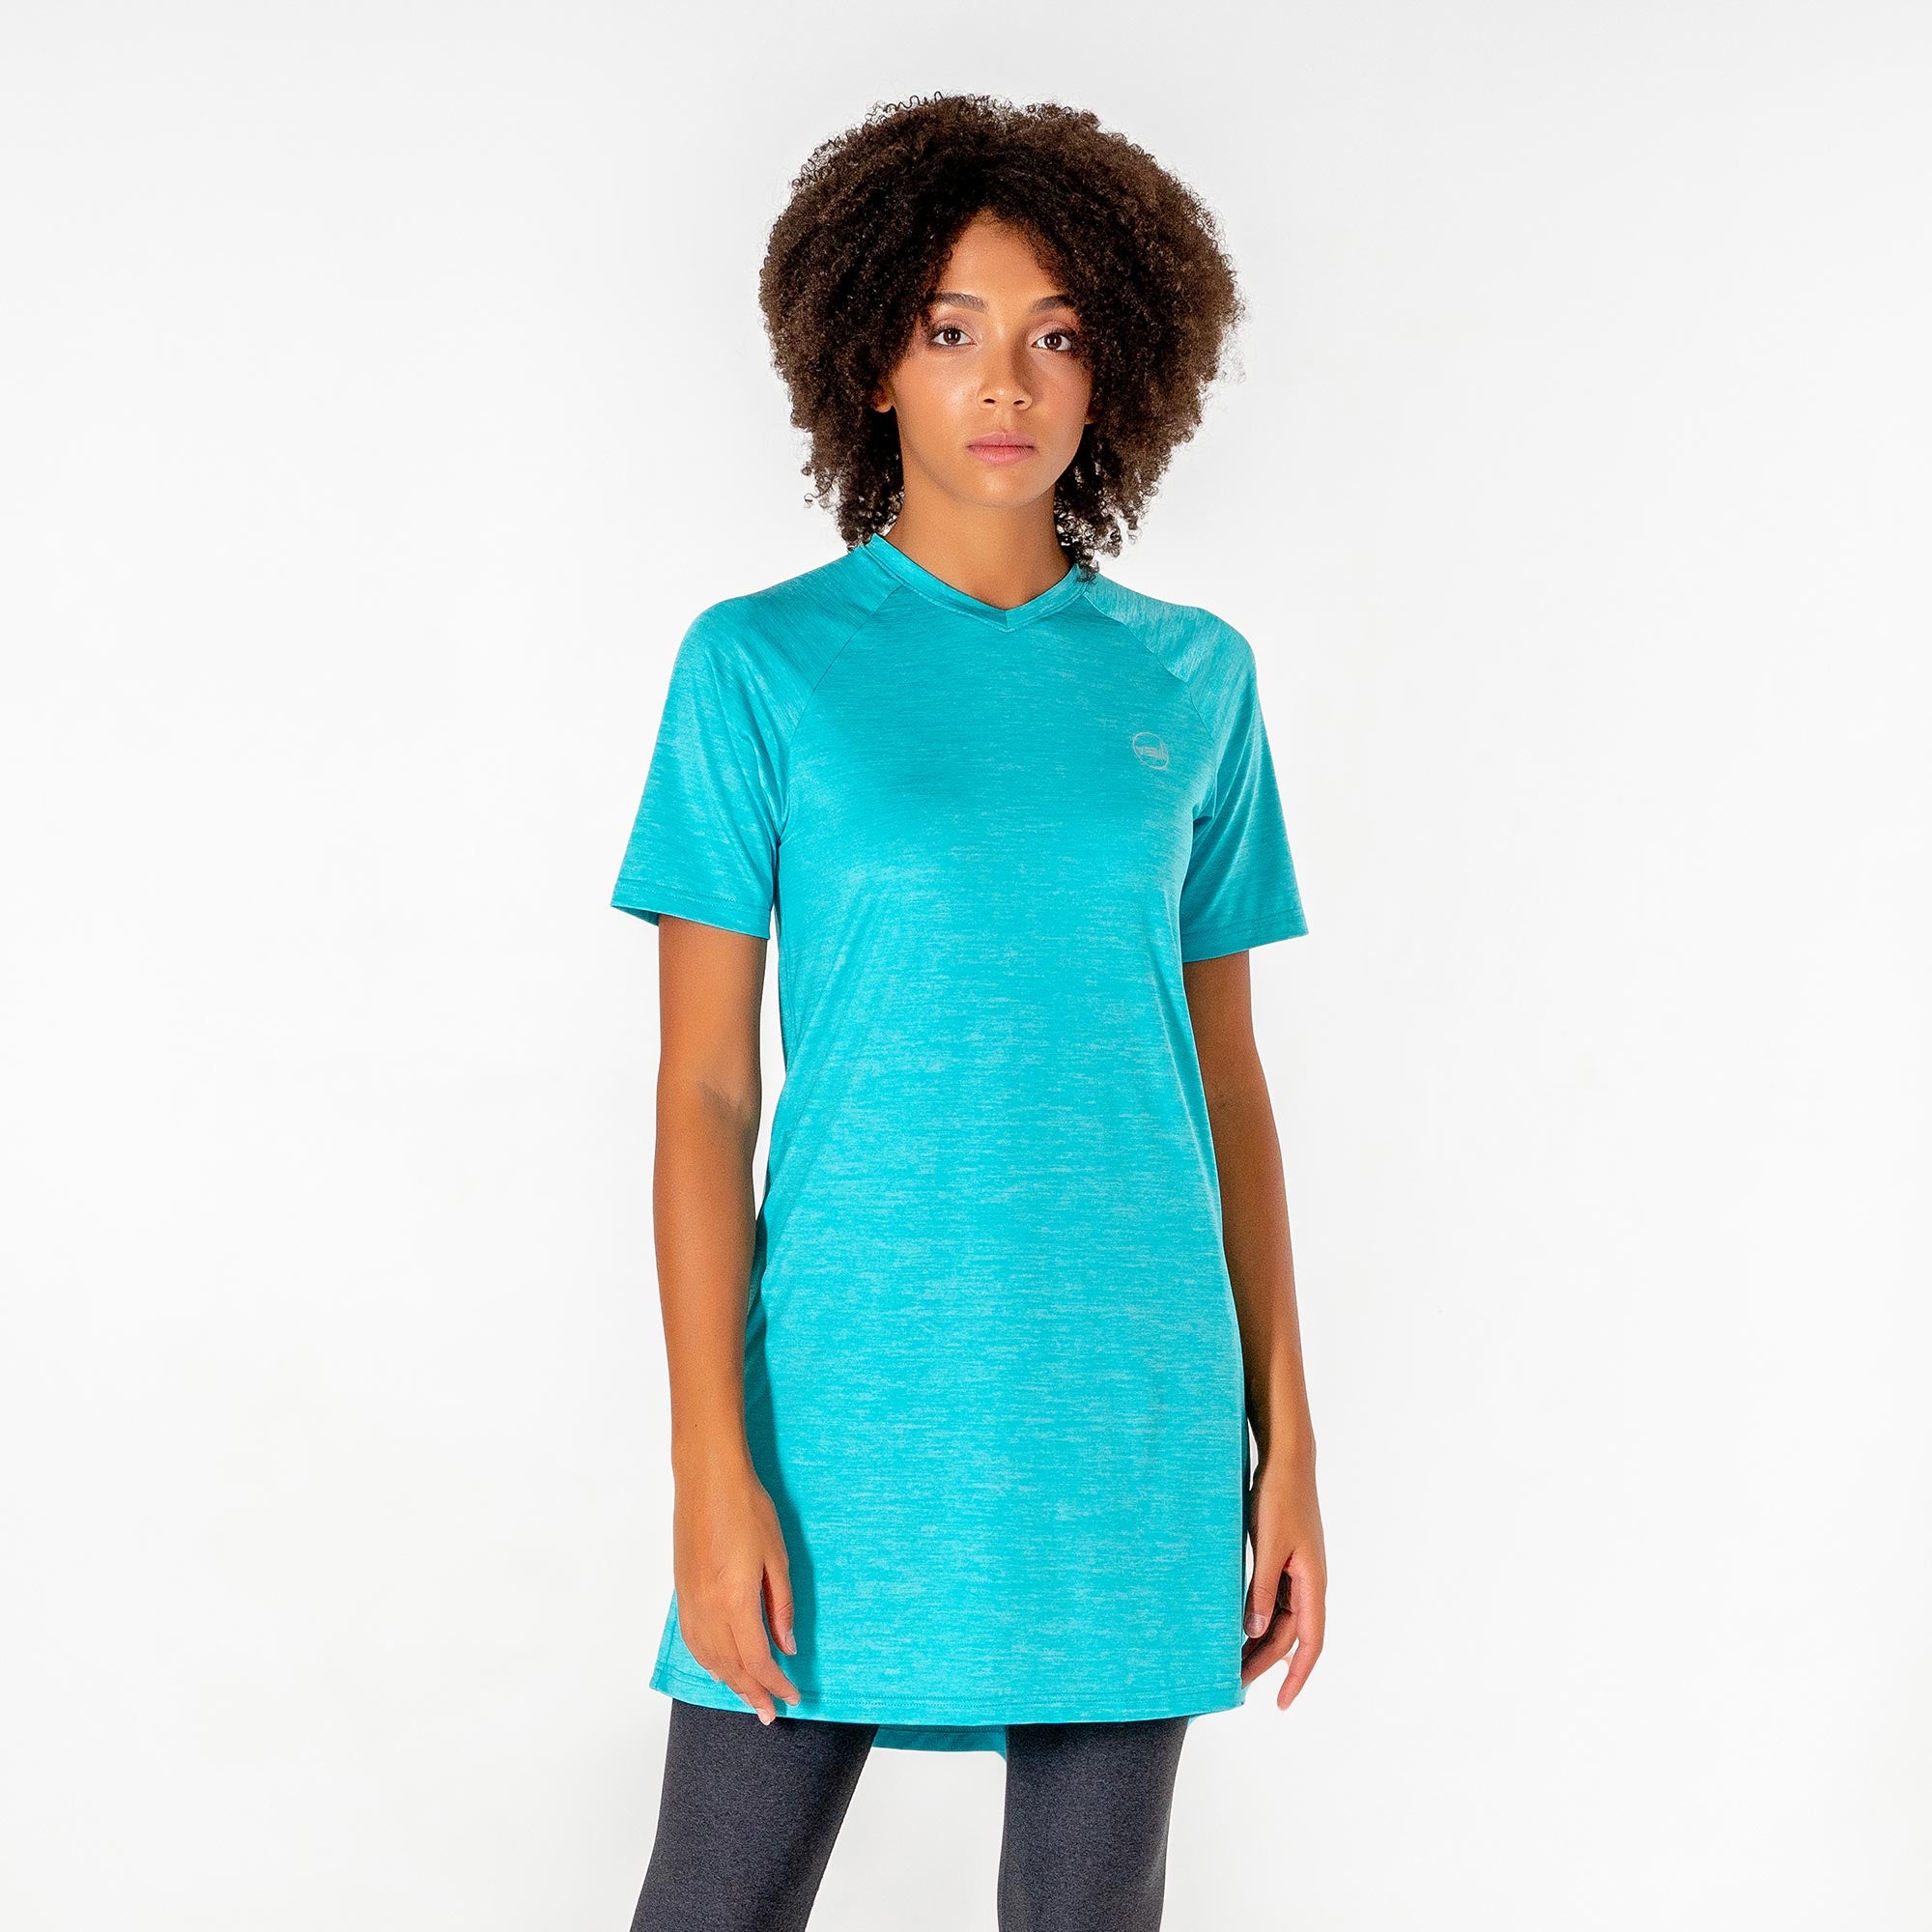 Connect T-Shirt Dress in Turquoise by Veil Garments. Modest activewear collection.